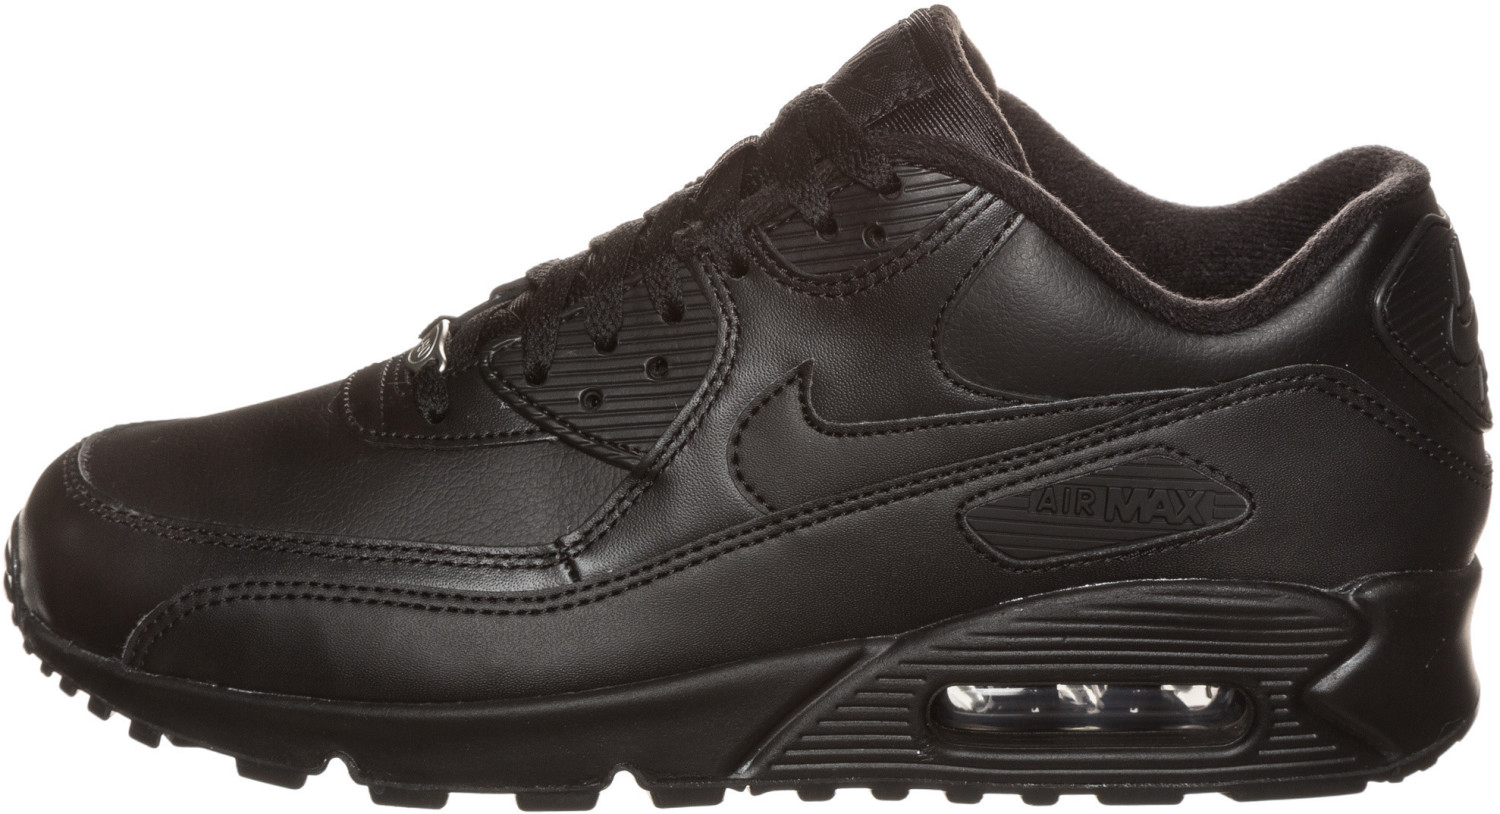 Nike Air Max 90 Leather all black